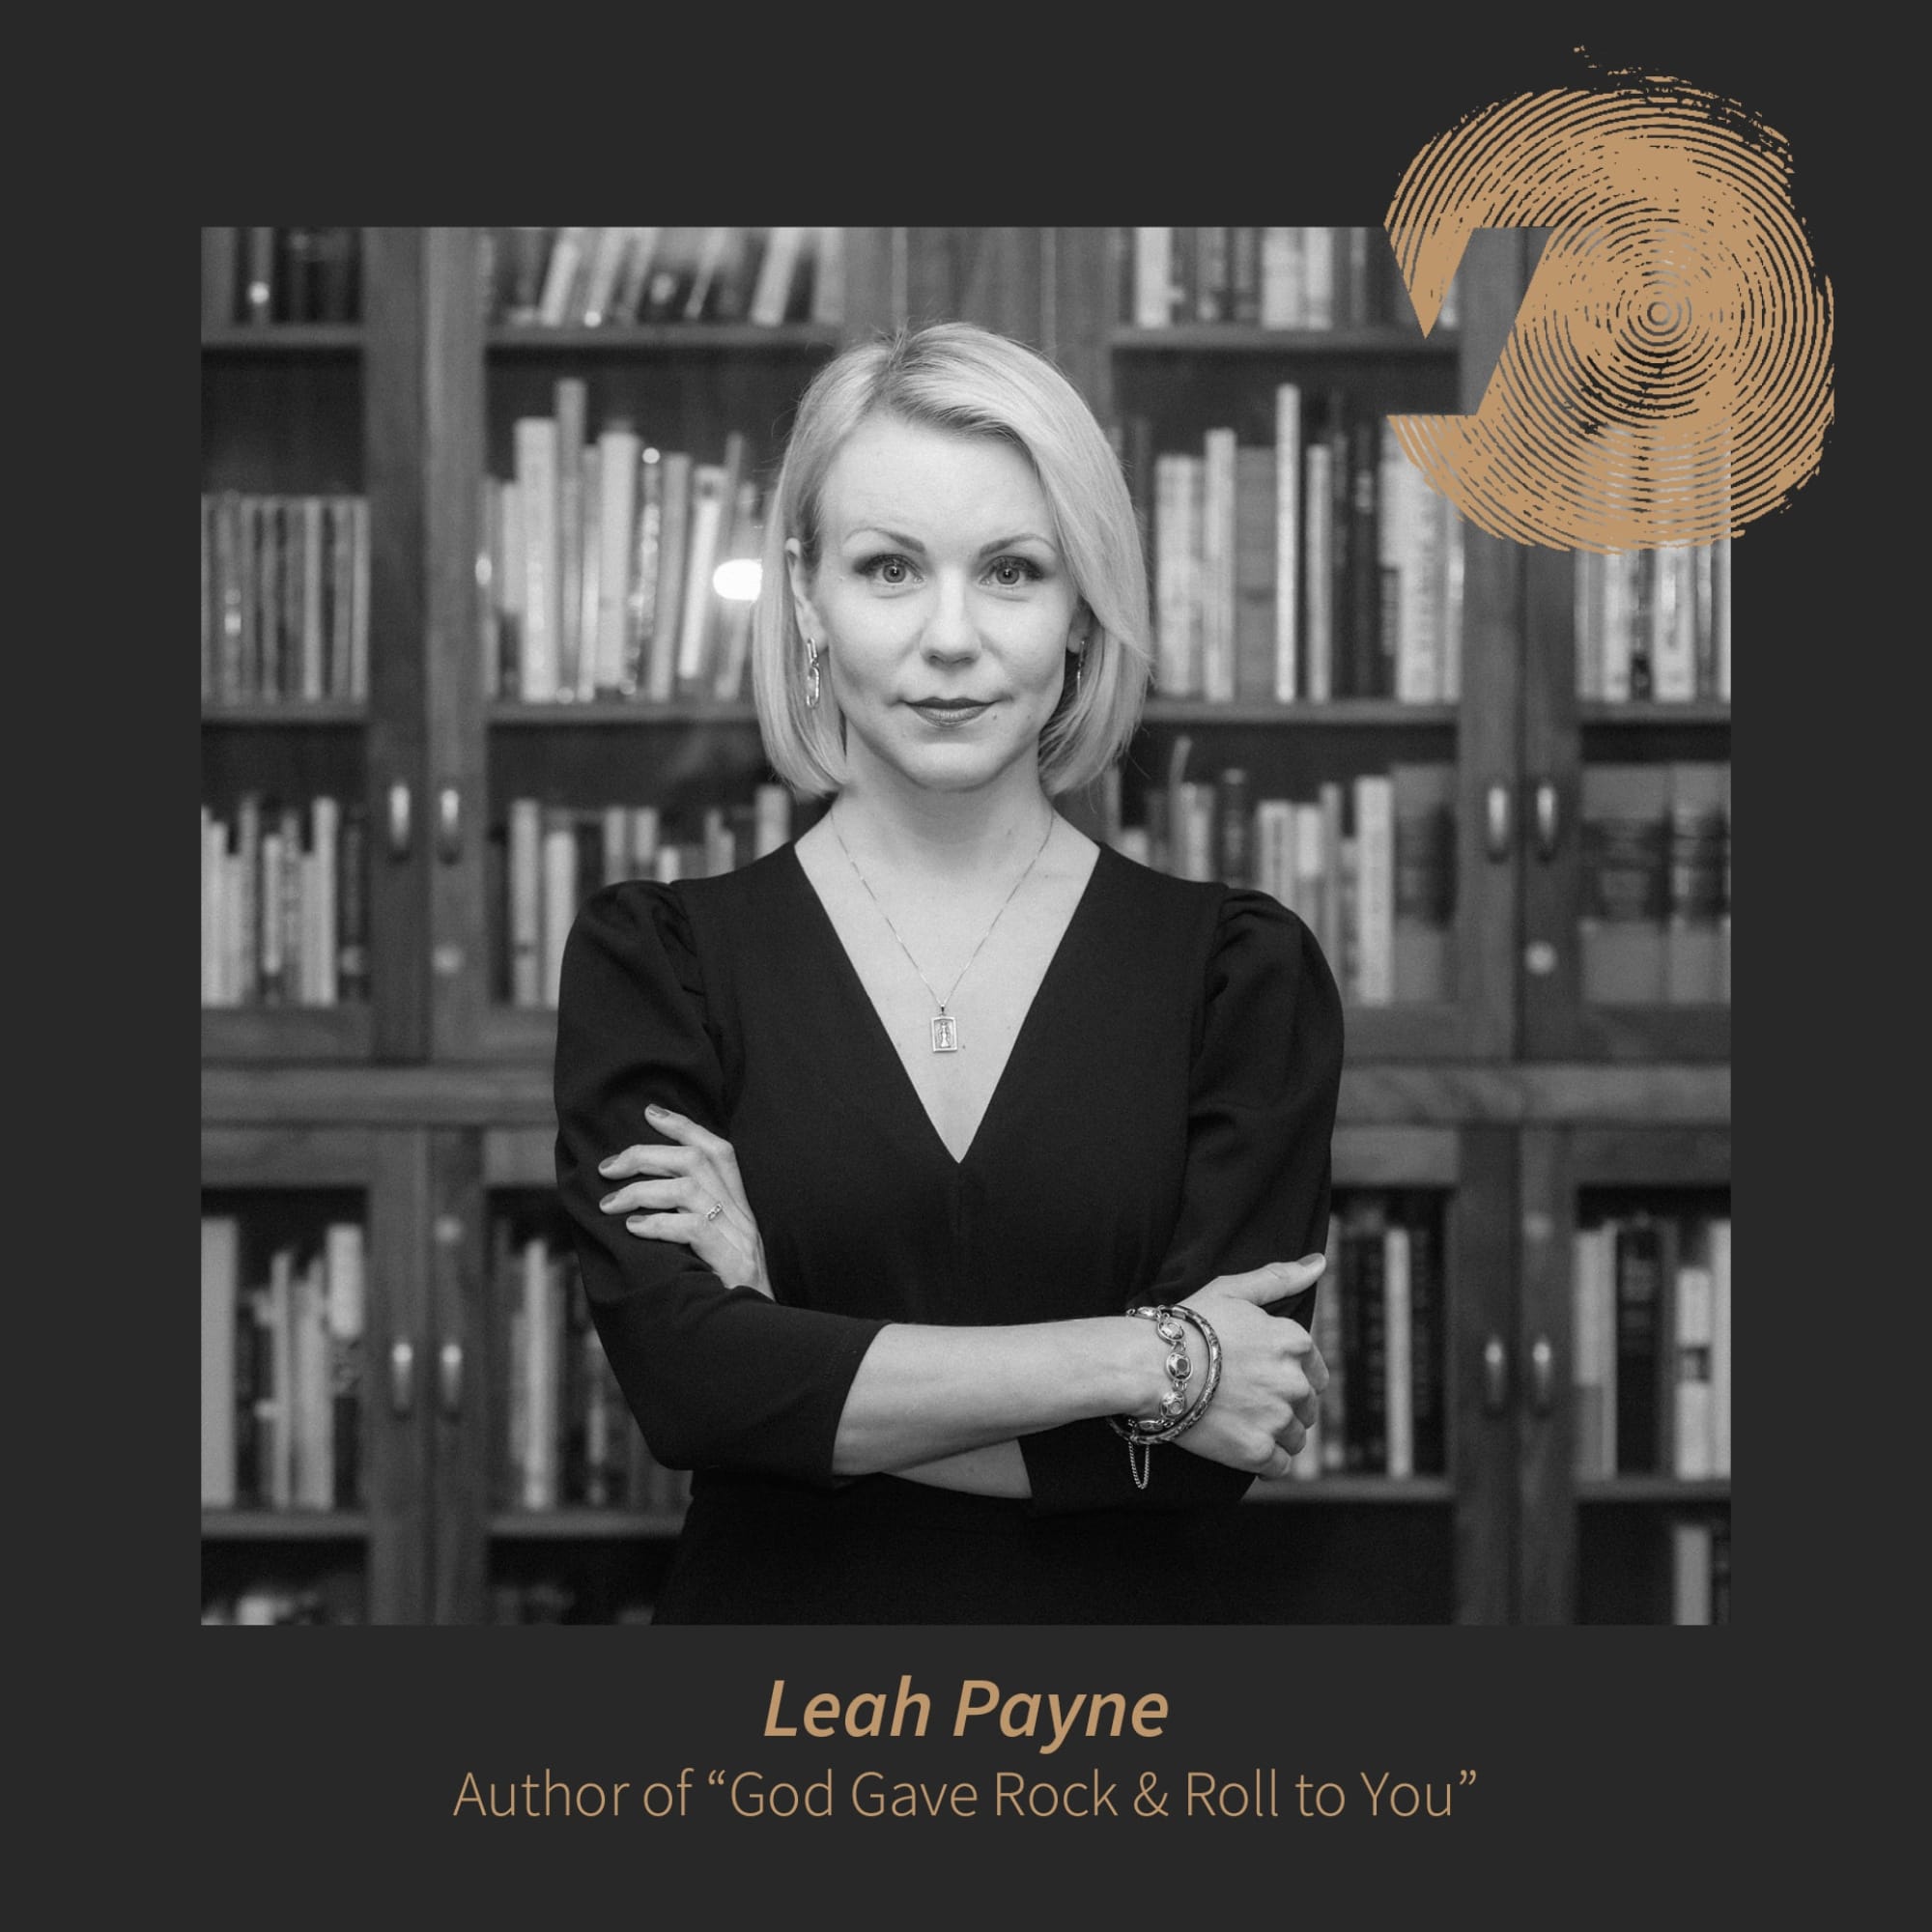 God Gave Rock & Roll to You: a History of Contemporary Christian Music with Dr. Leah Payne